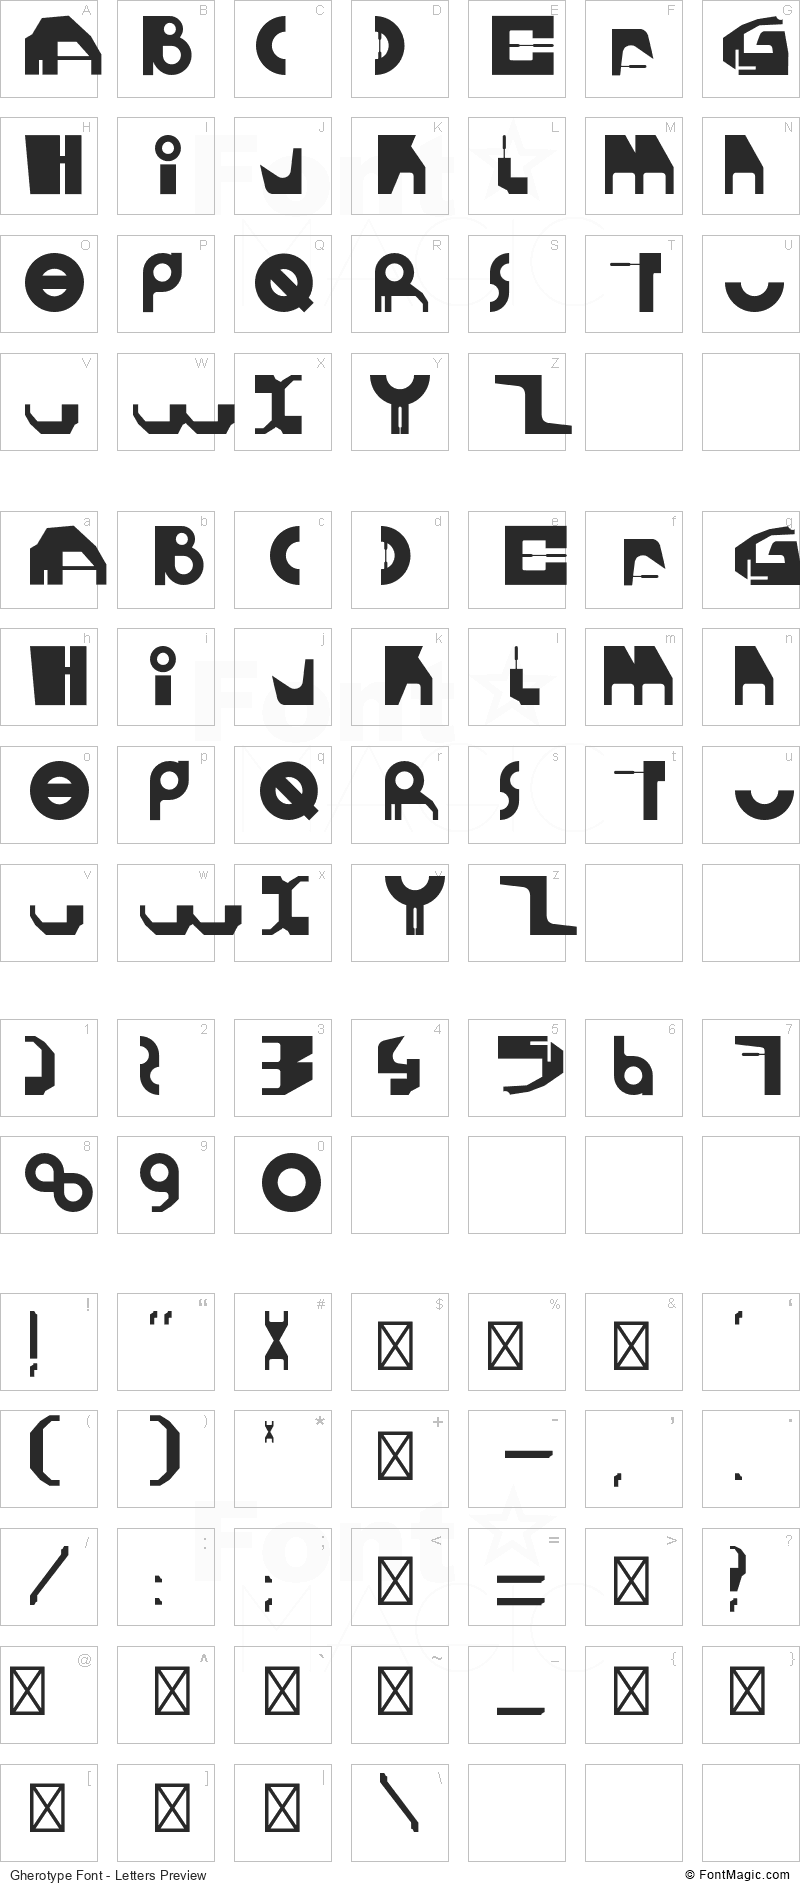 Gherotype Font - All Latters Preview Chart